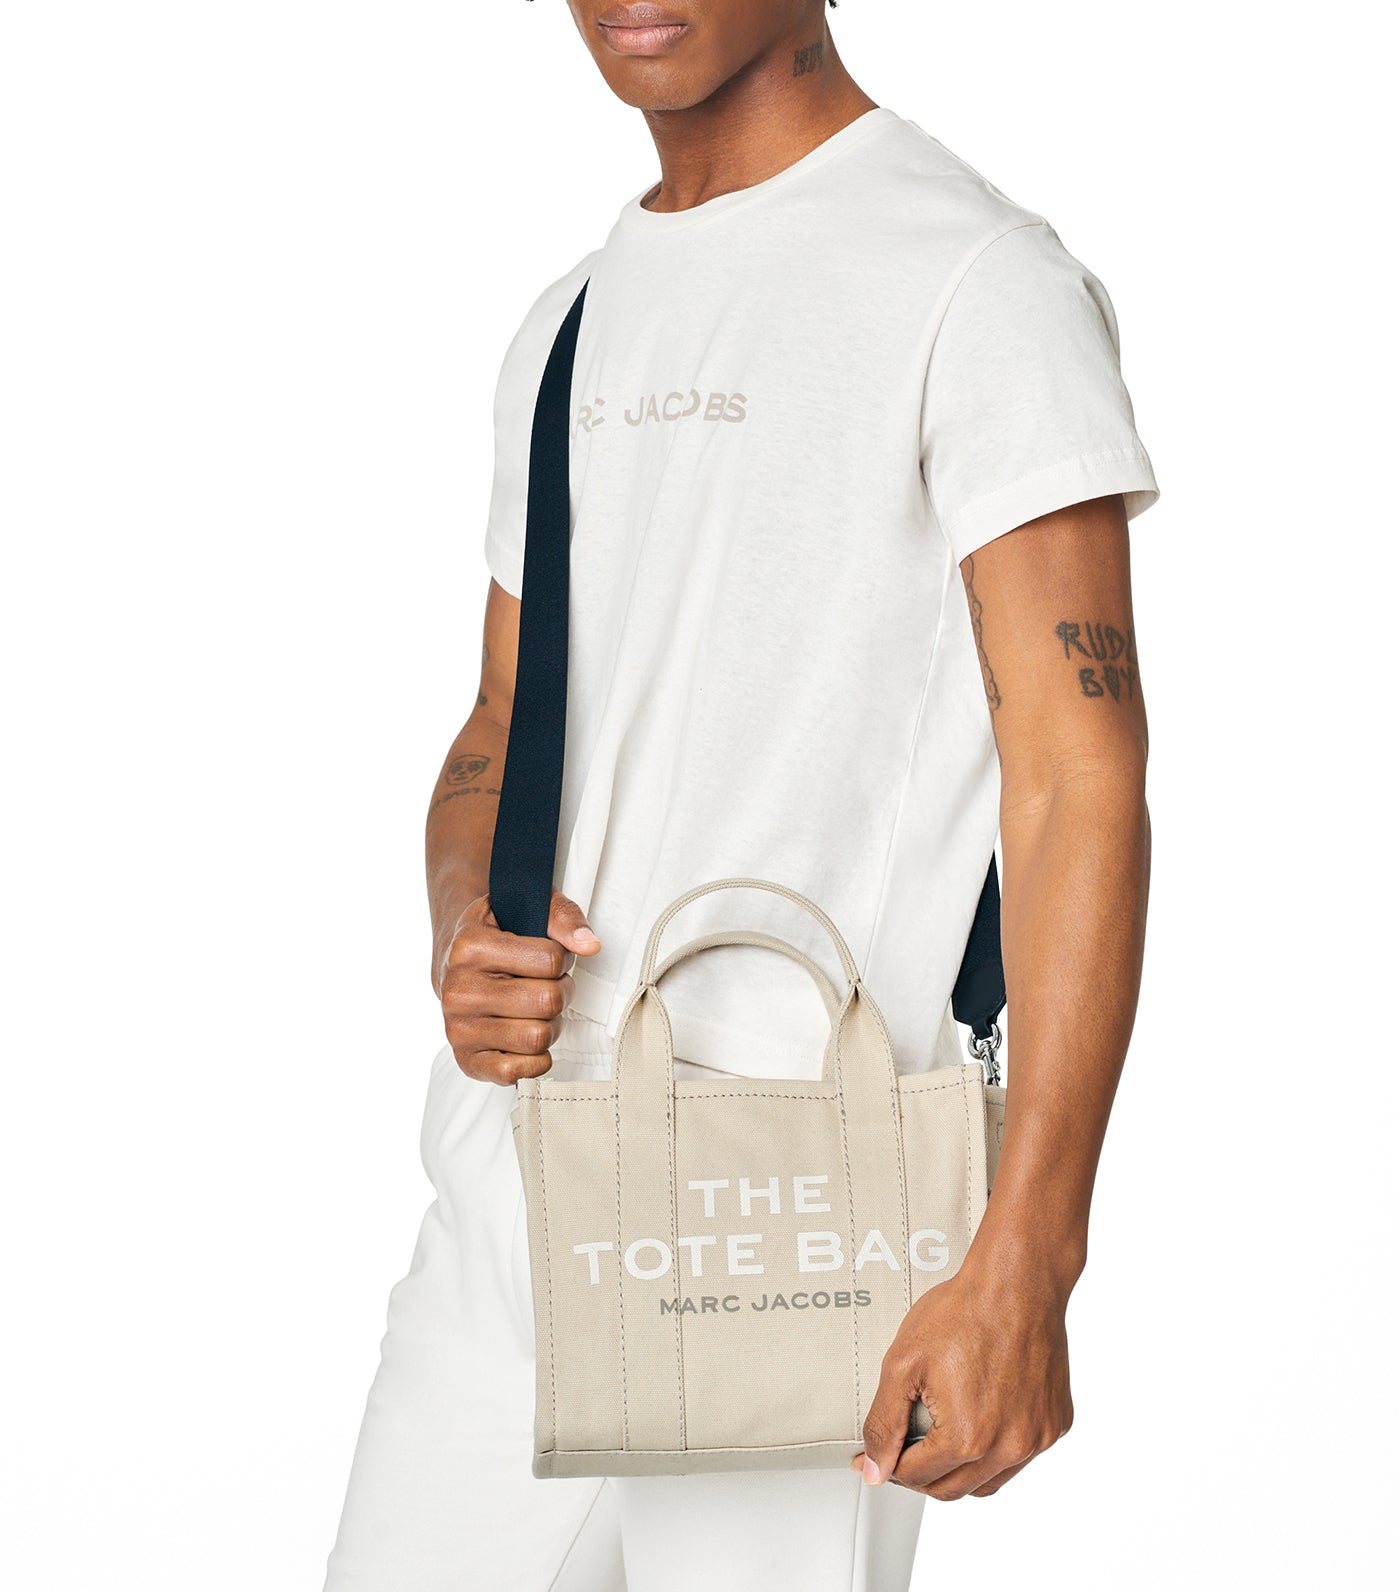 The Small Tote Bag Beige